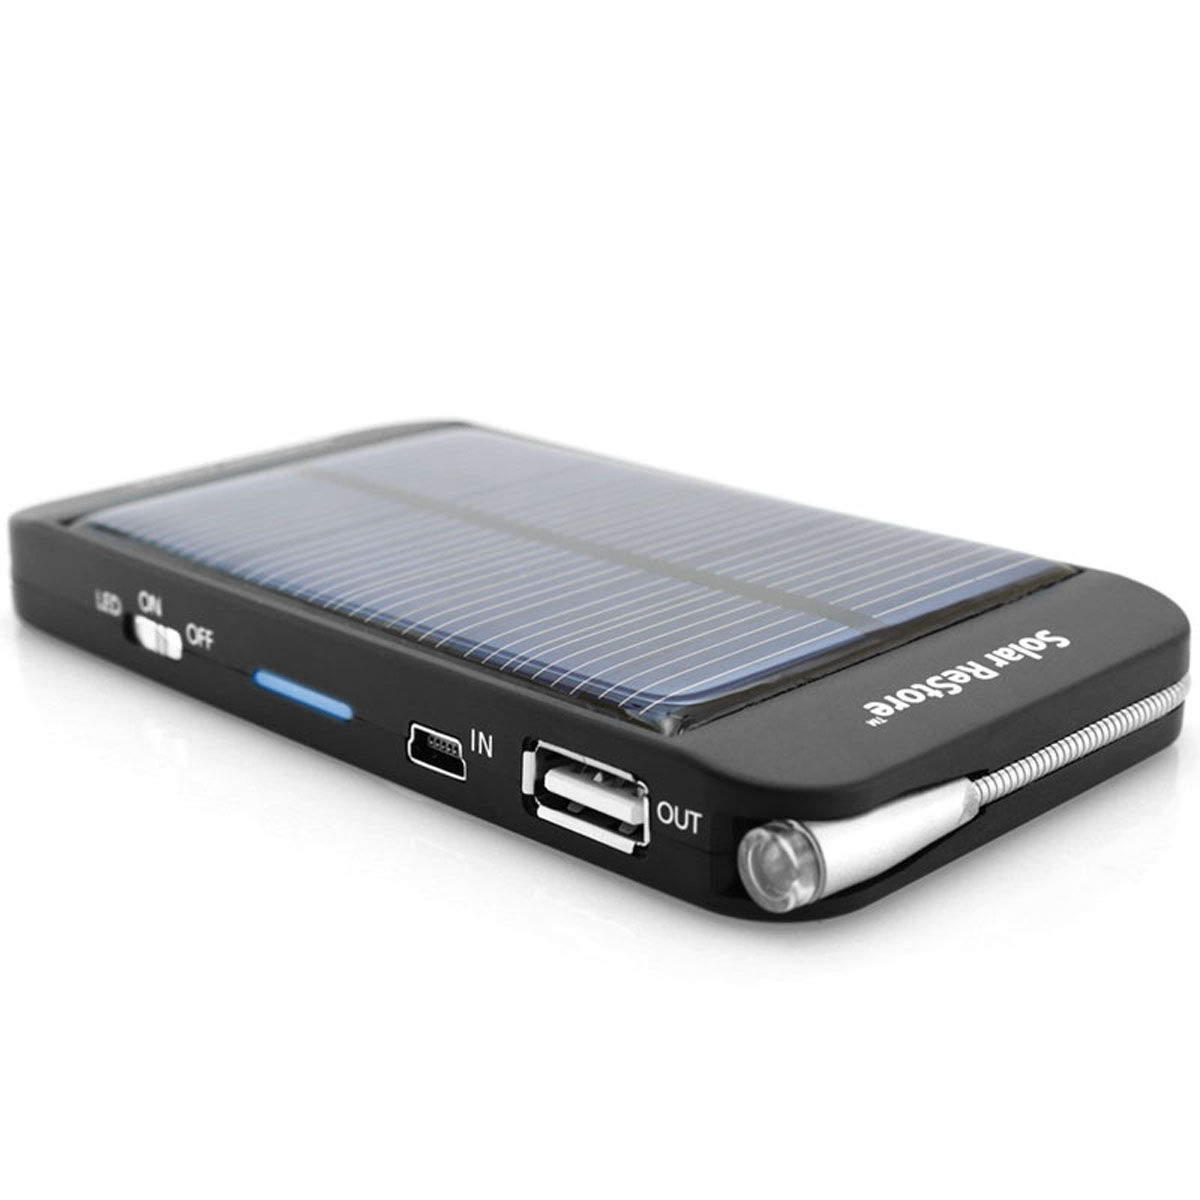 ReVIVE Solar ReStore Solar Charger and External Battery ...